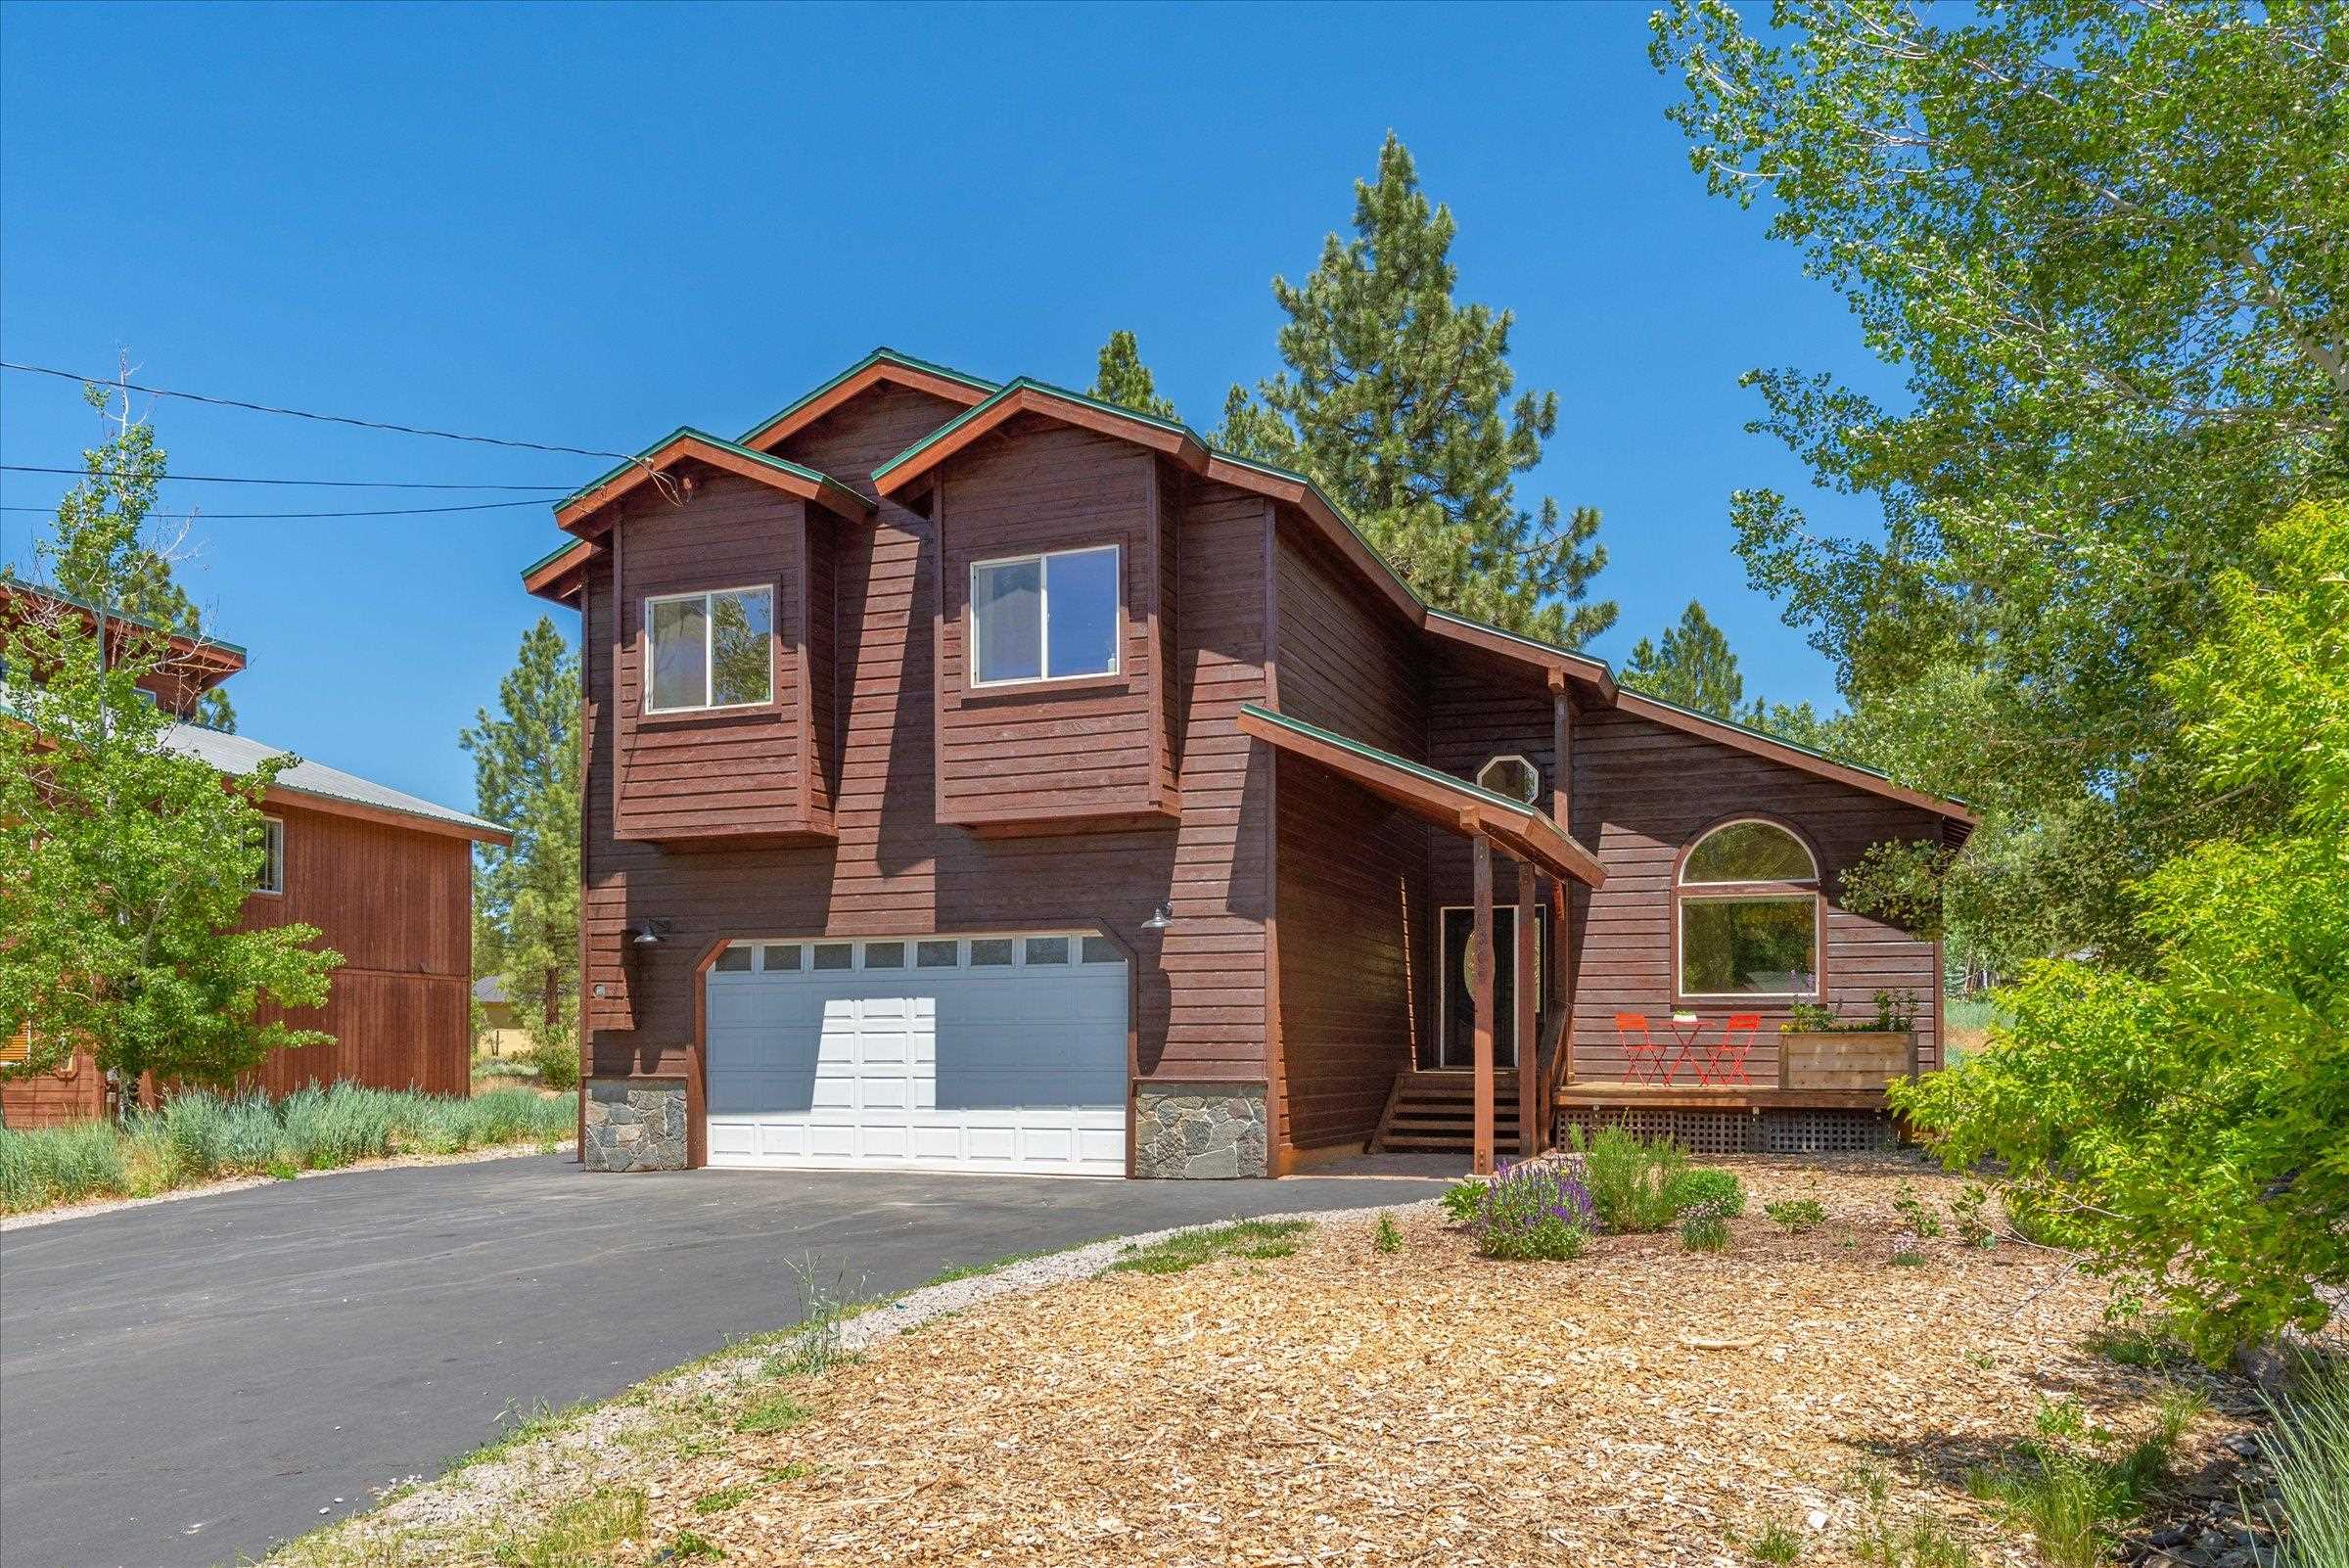 Image for 10309 Evensham Place, Truckee, CA 96161-0000